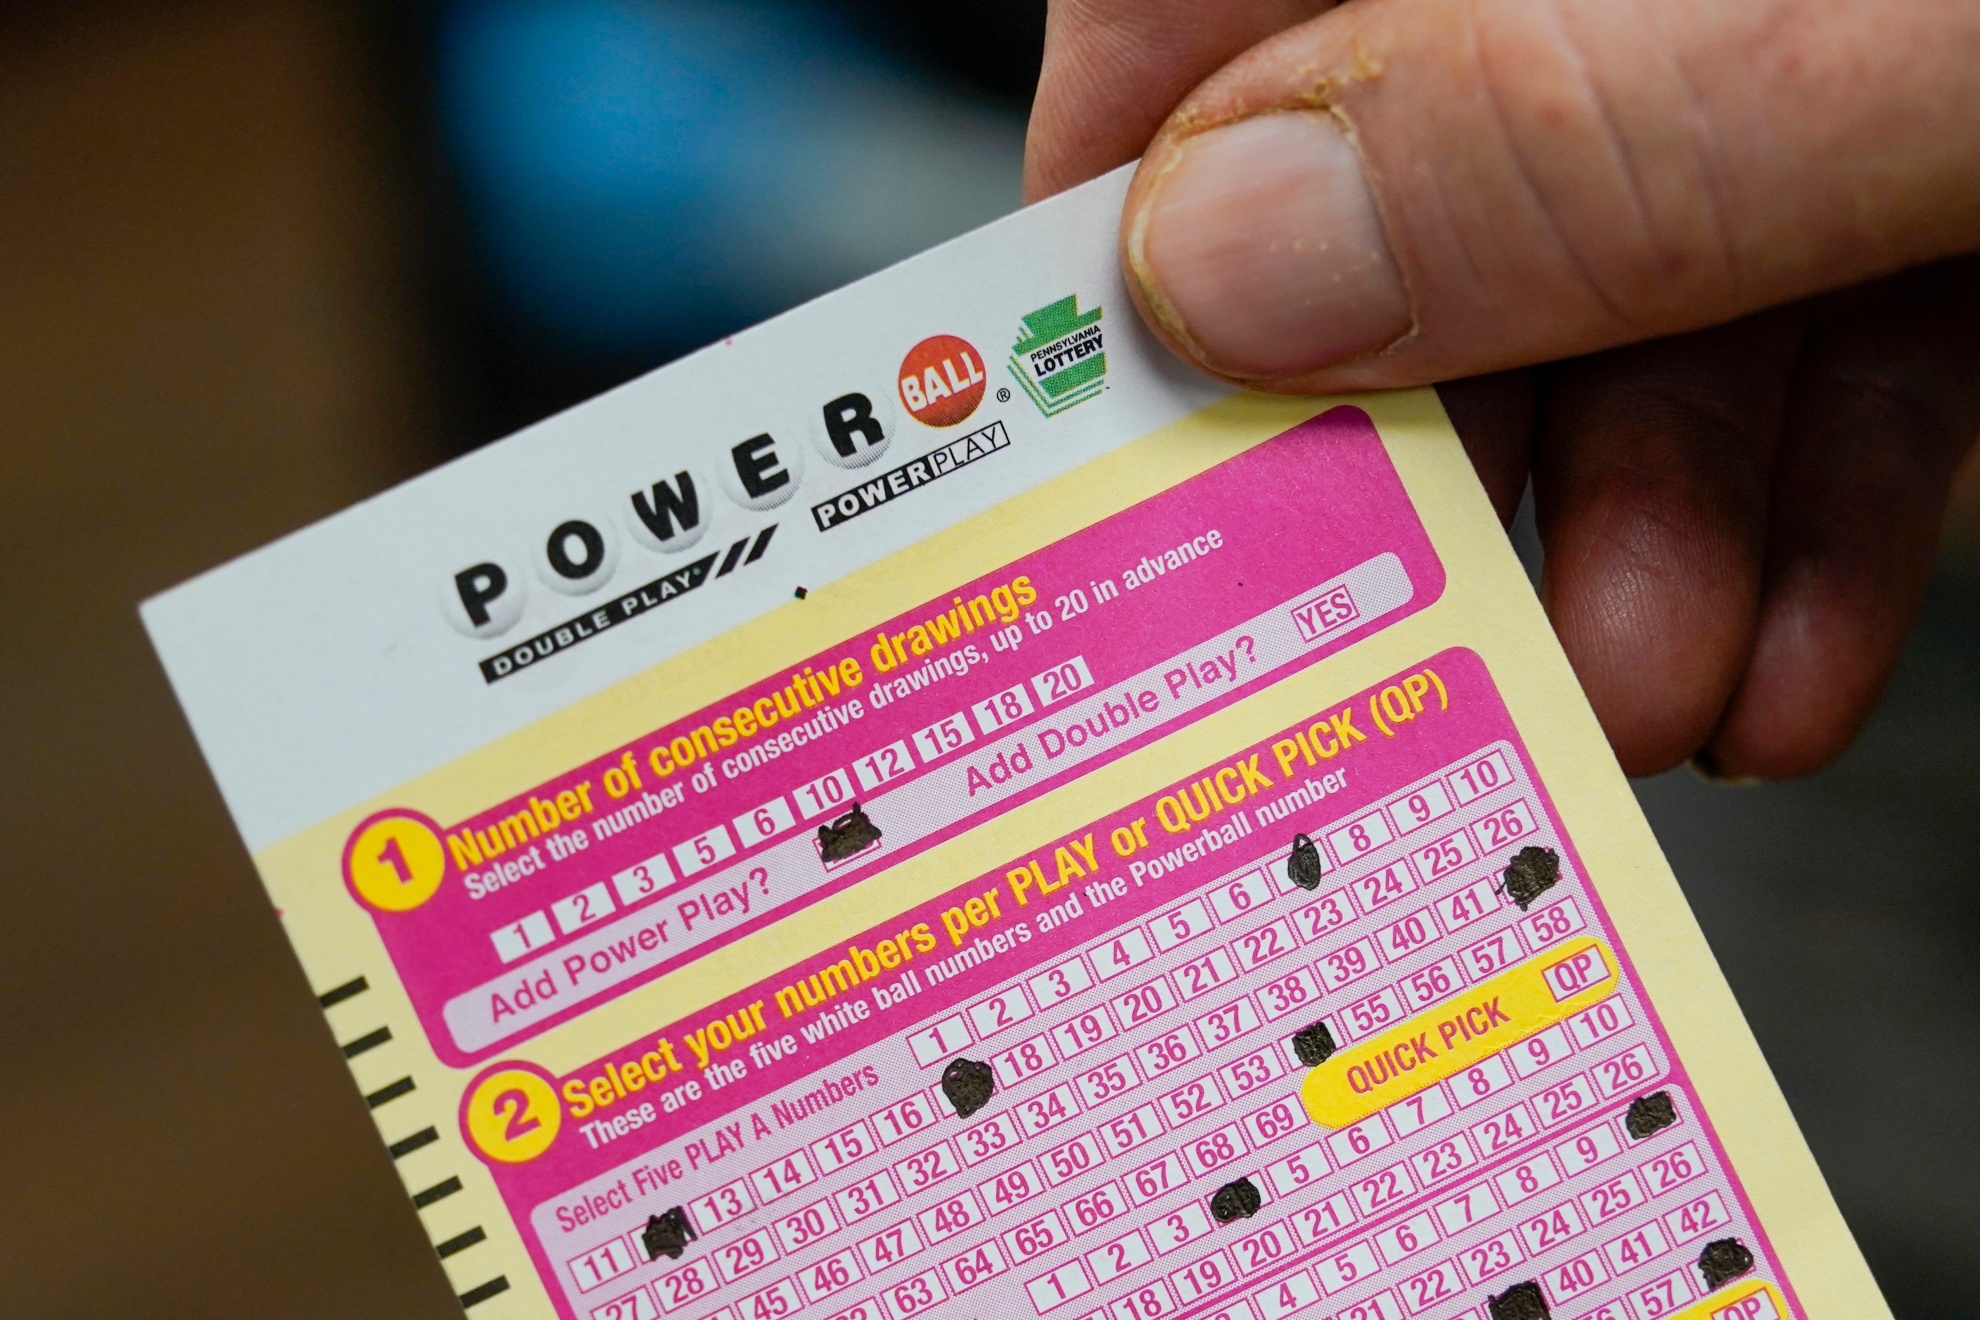 Image of a Powerball Ticket